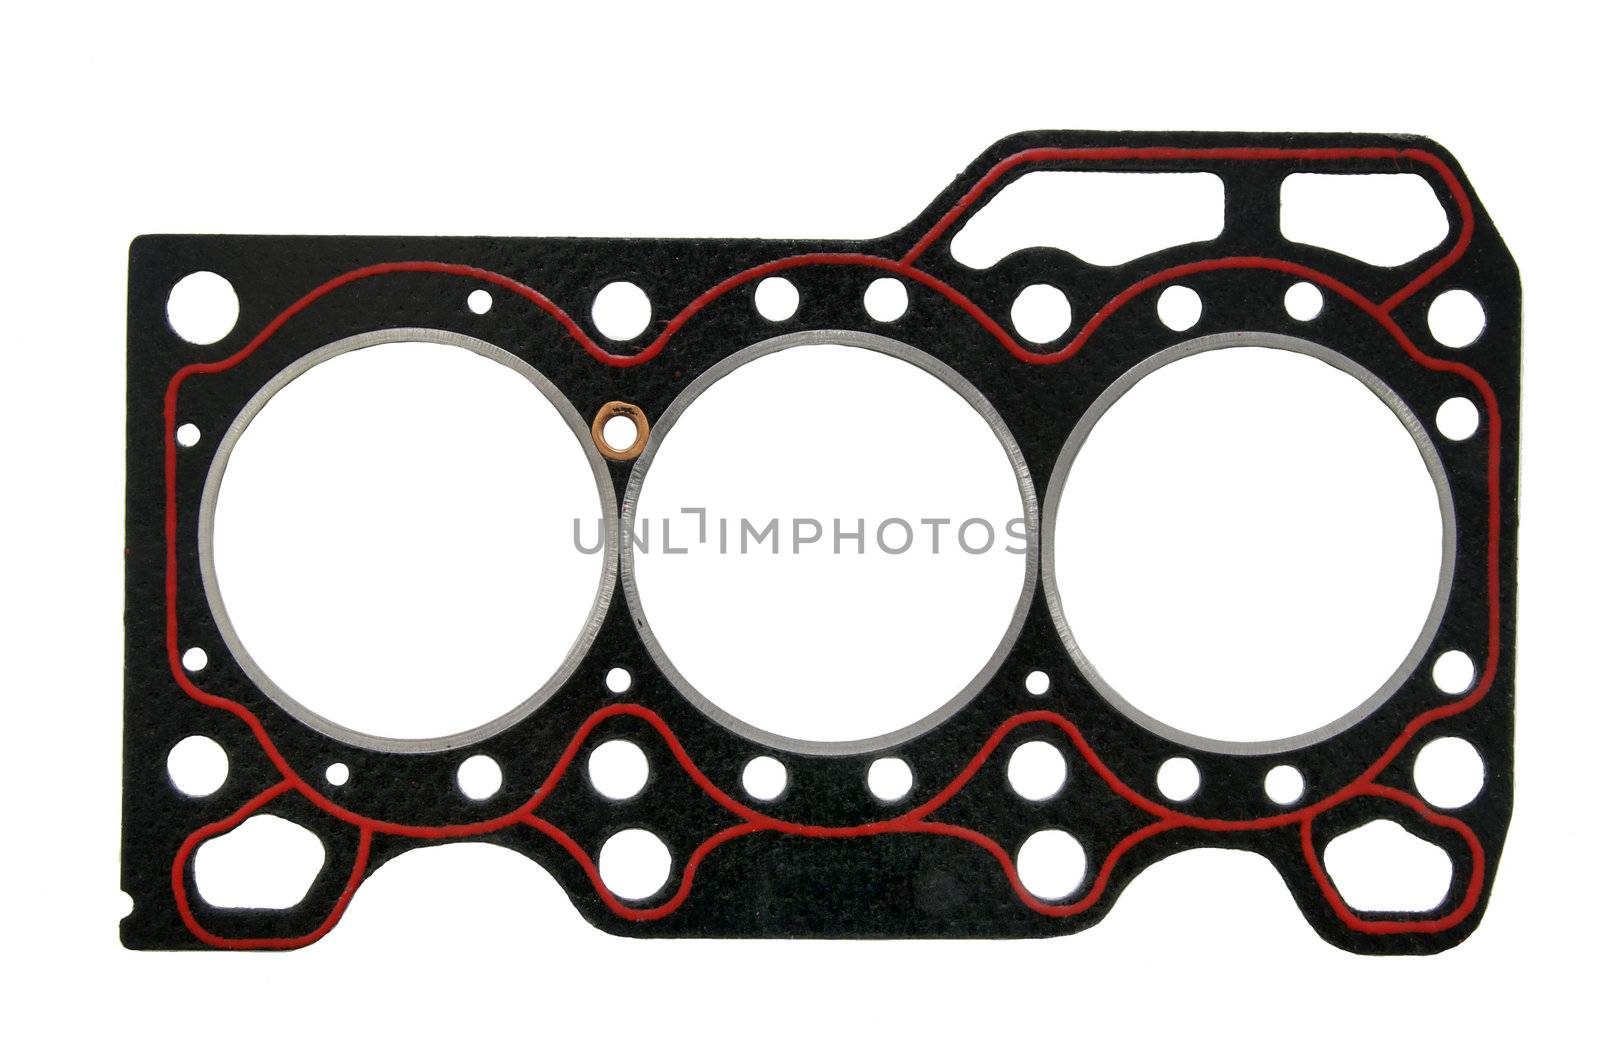 Cylinder head gasket on a white background